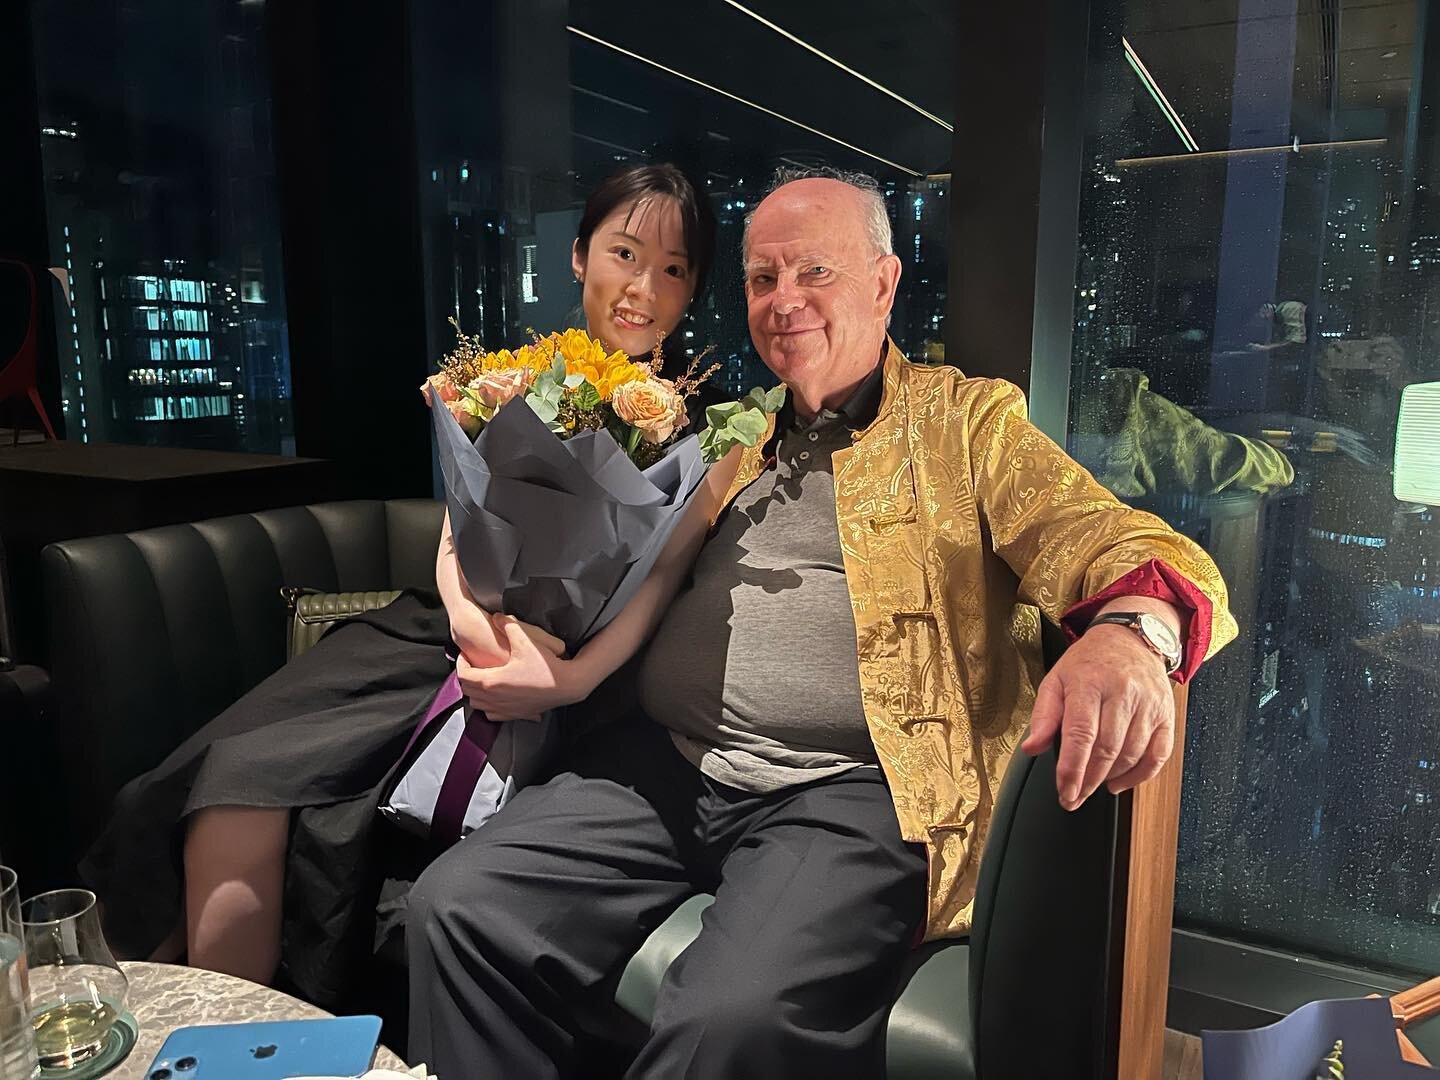 It was nice to meet Professor Julian Jacobson in Hong Kong. Thank you for the wonderful performance and lecture. Look forward to seeing you again in London!